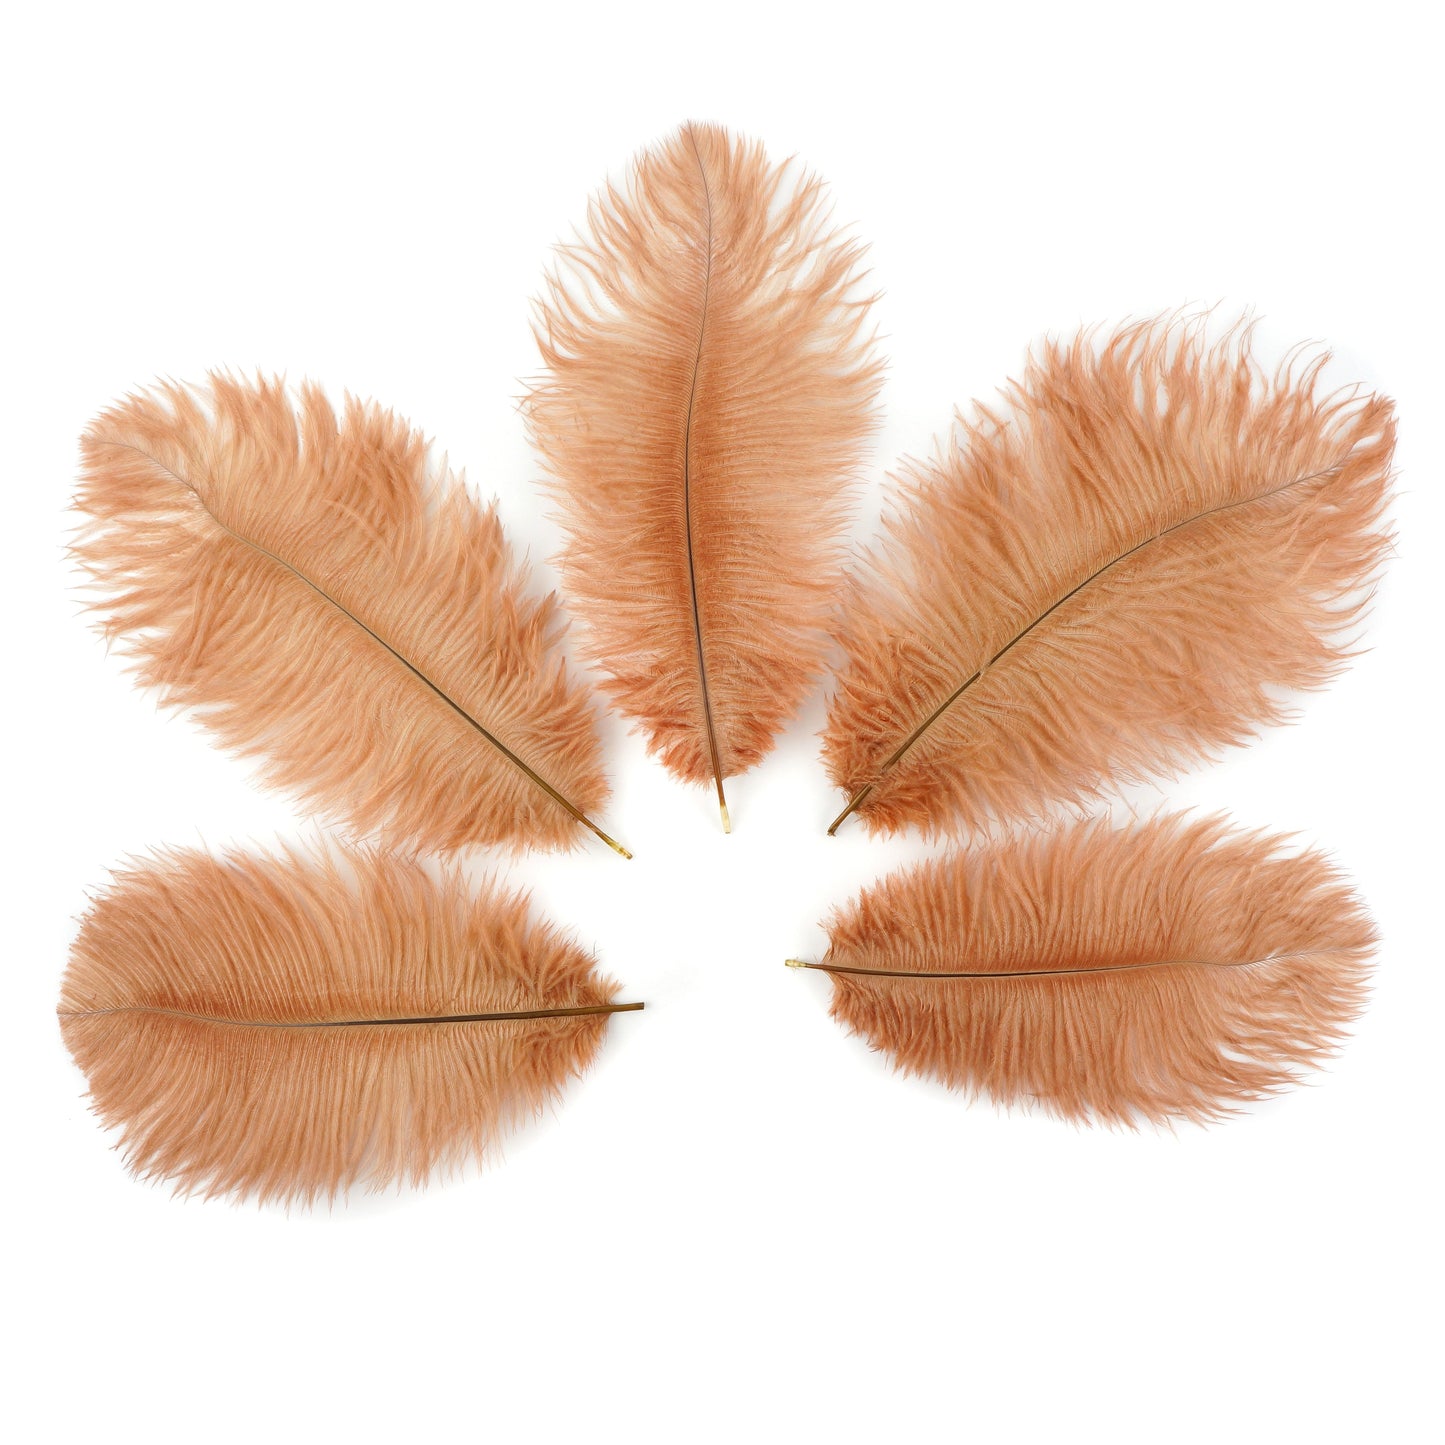 Ostrich Feathers 9-12" Drabs -  Cinnamon